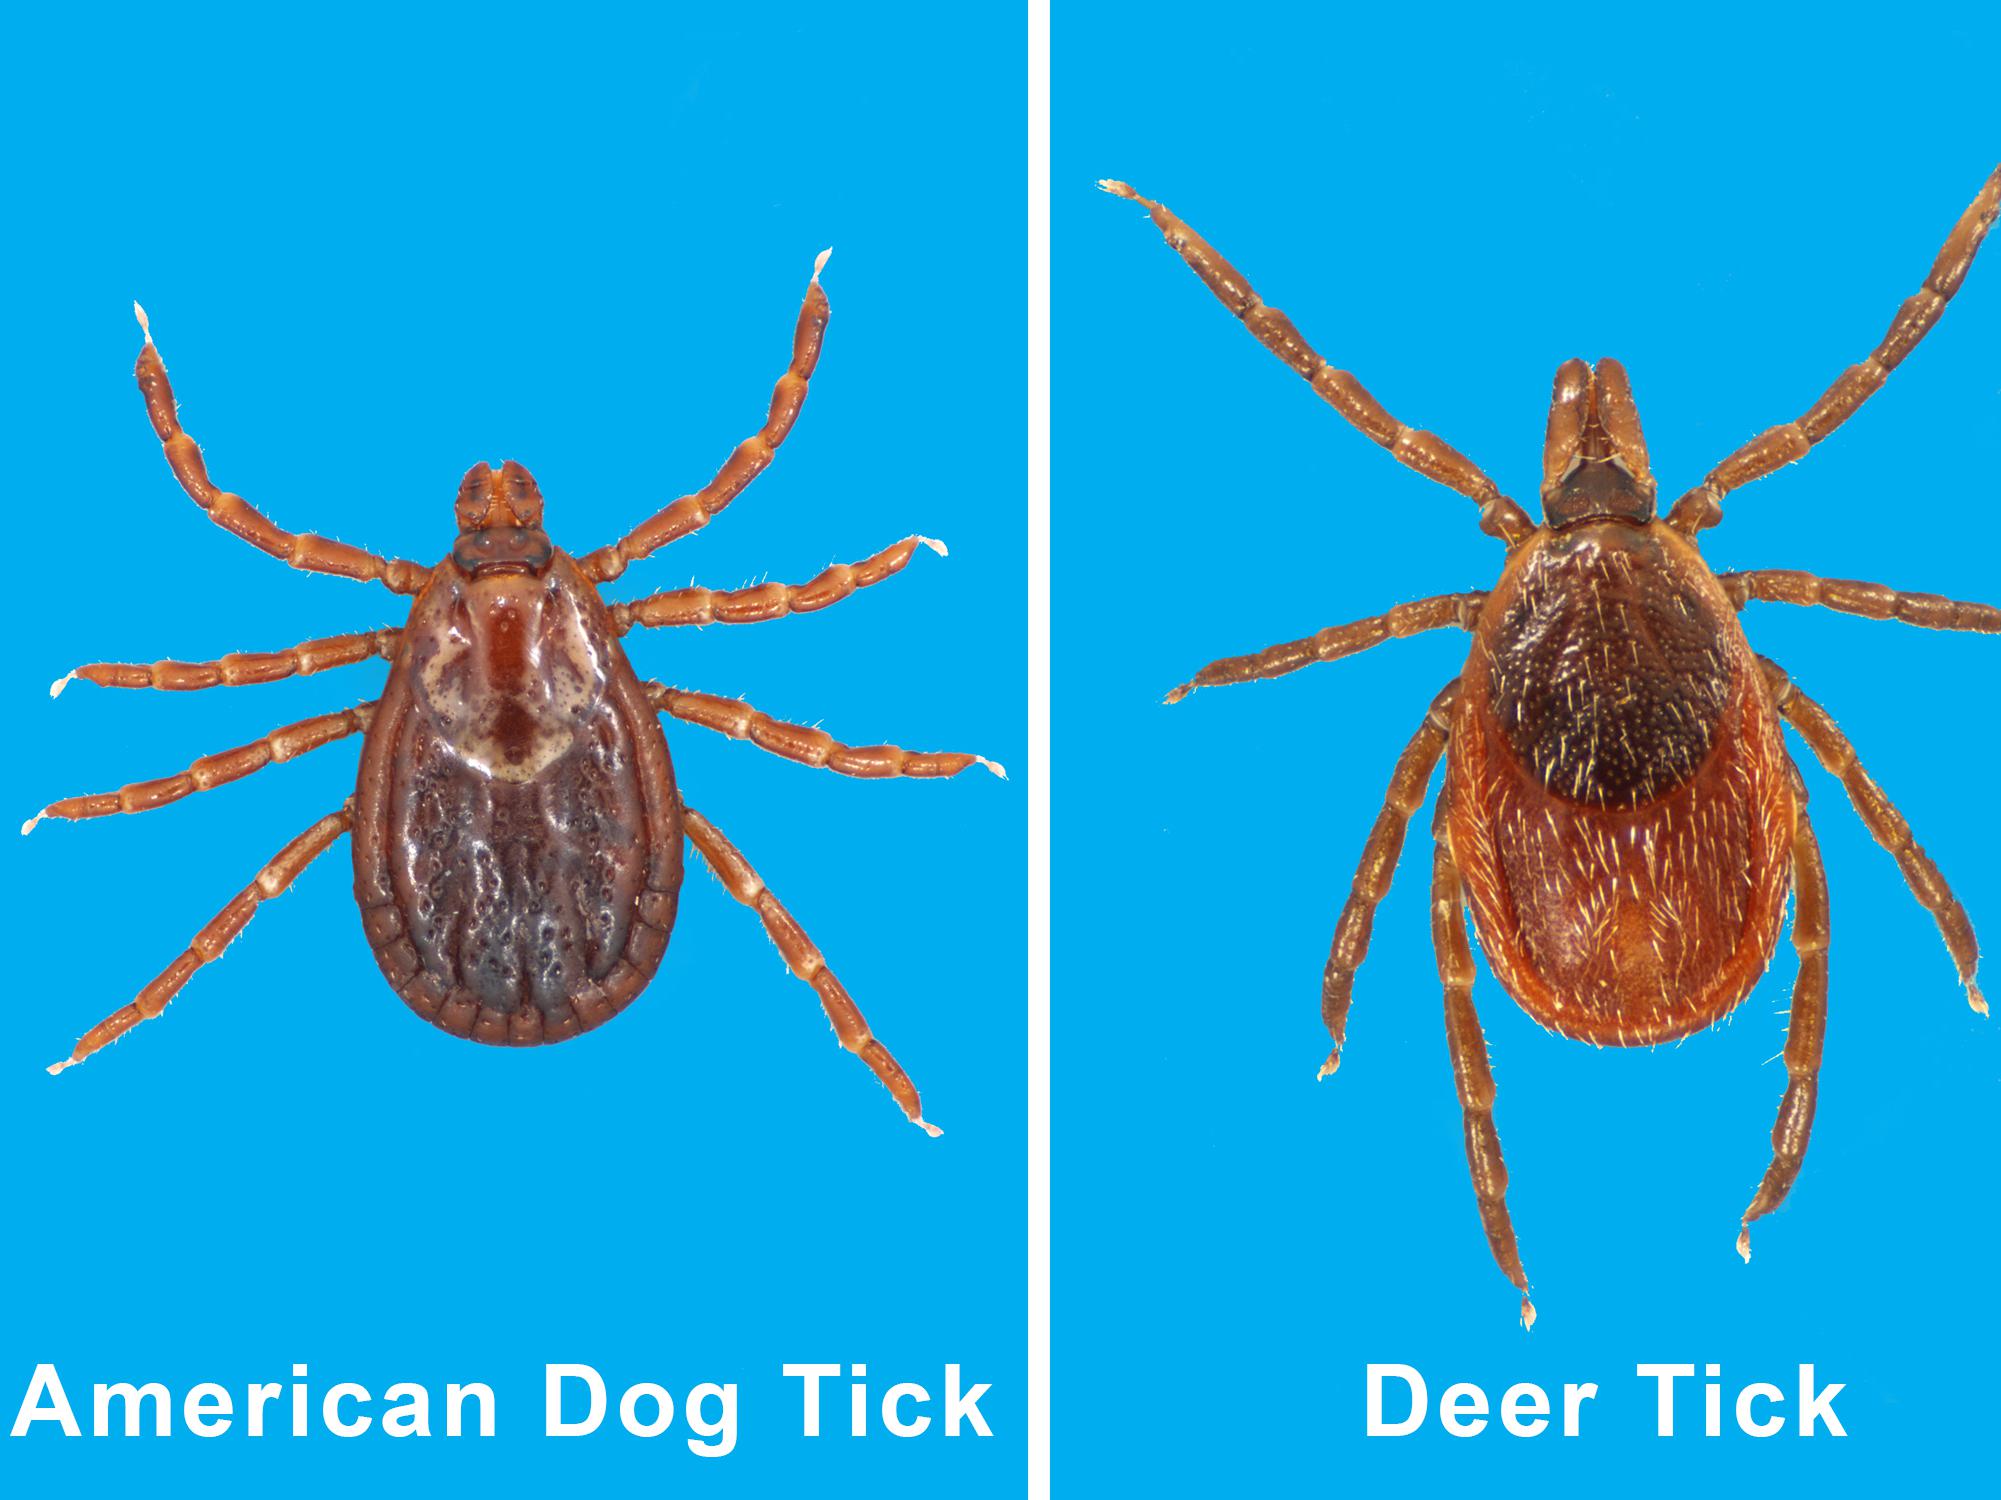 The deer tick and the American dog tick, shown here, are two of the five most common tick species found in Mississippi. The state is home to about 19 tick species. (File photos by MSU Extension Service/Blake Layton)